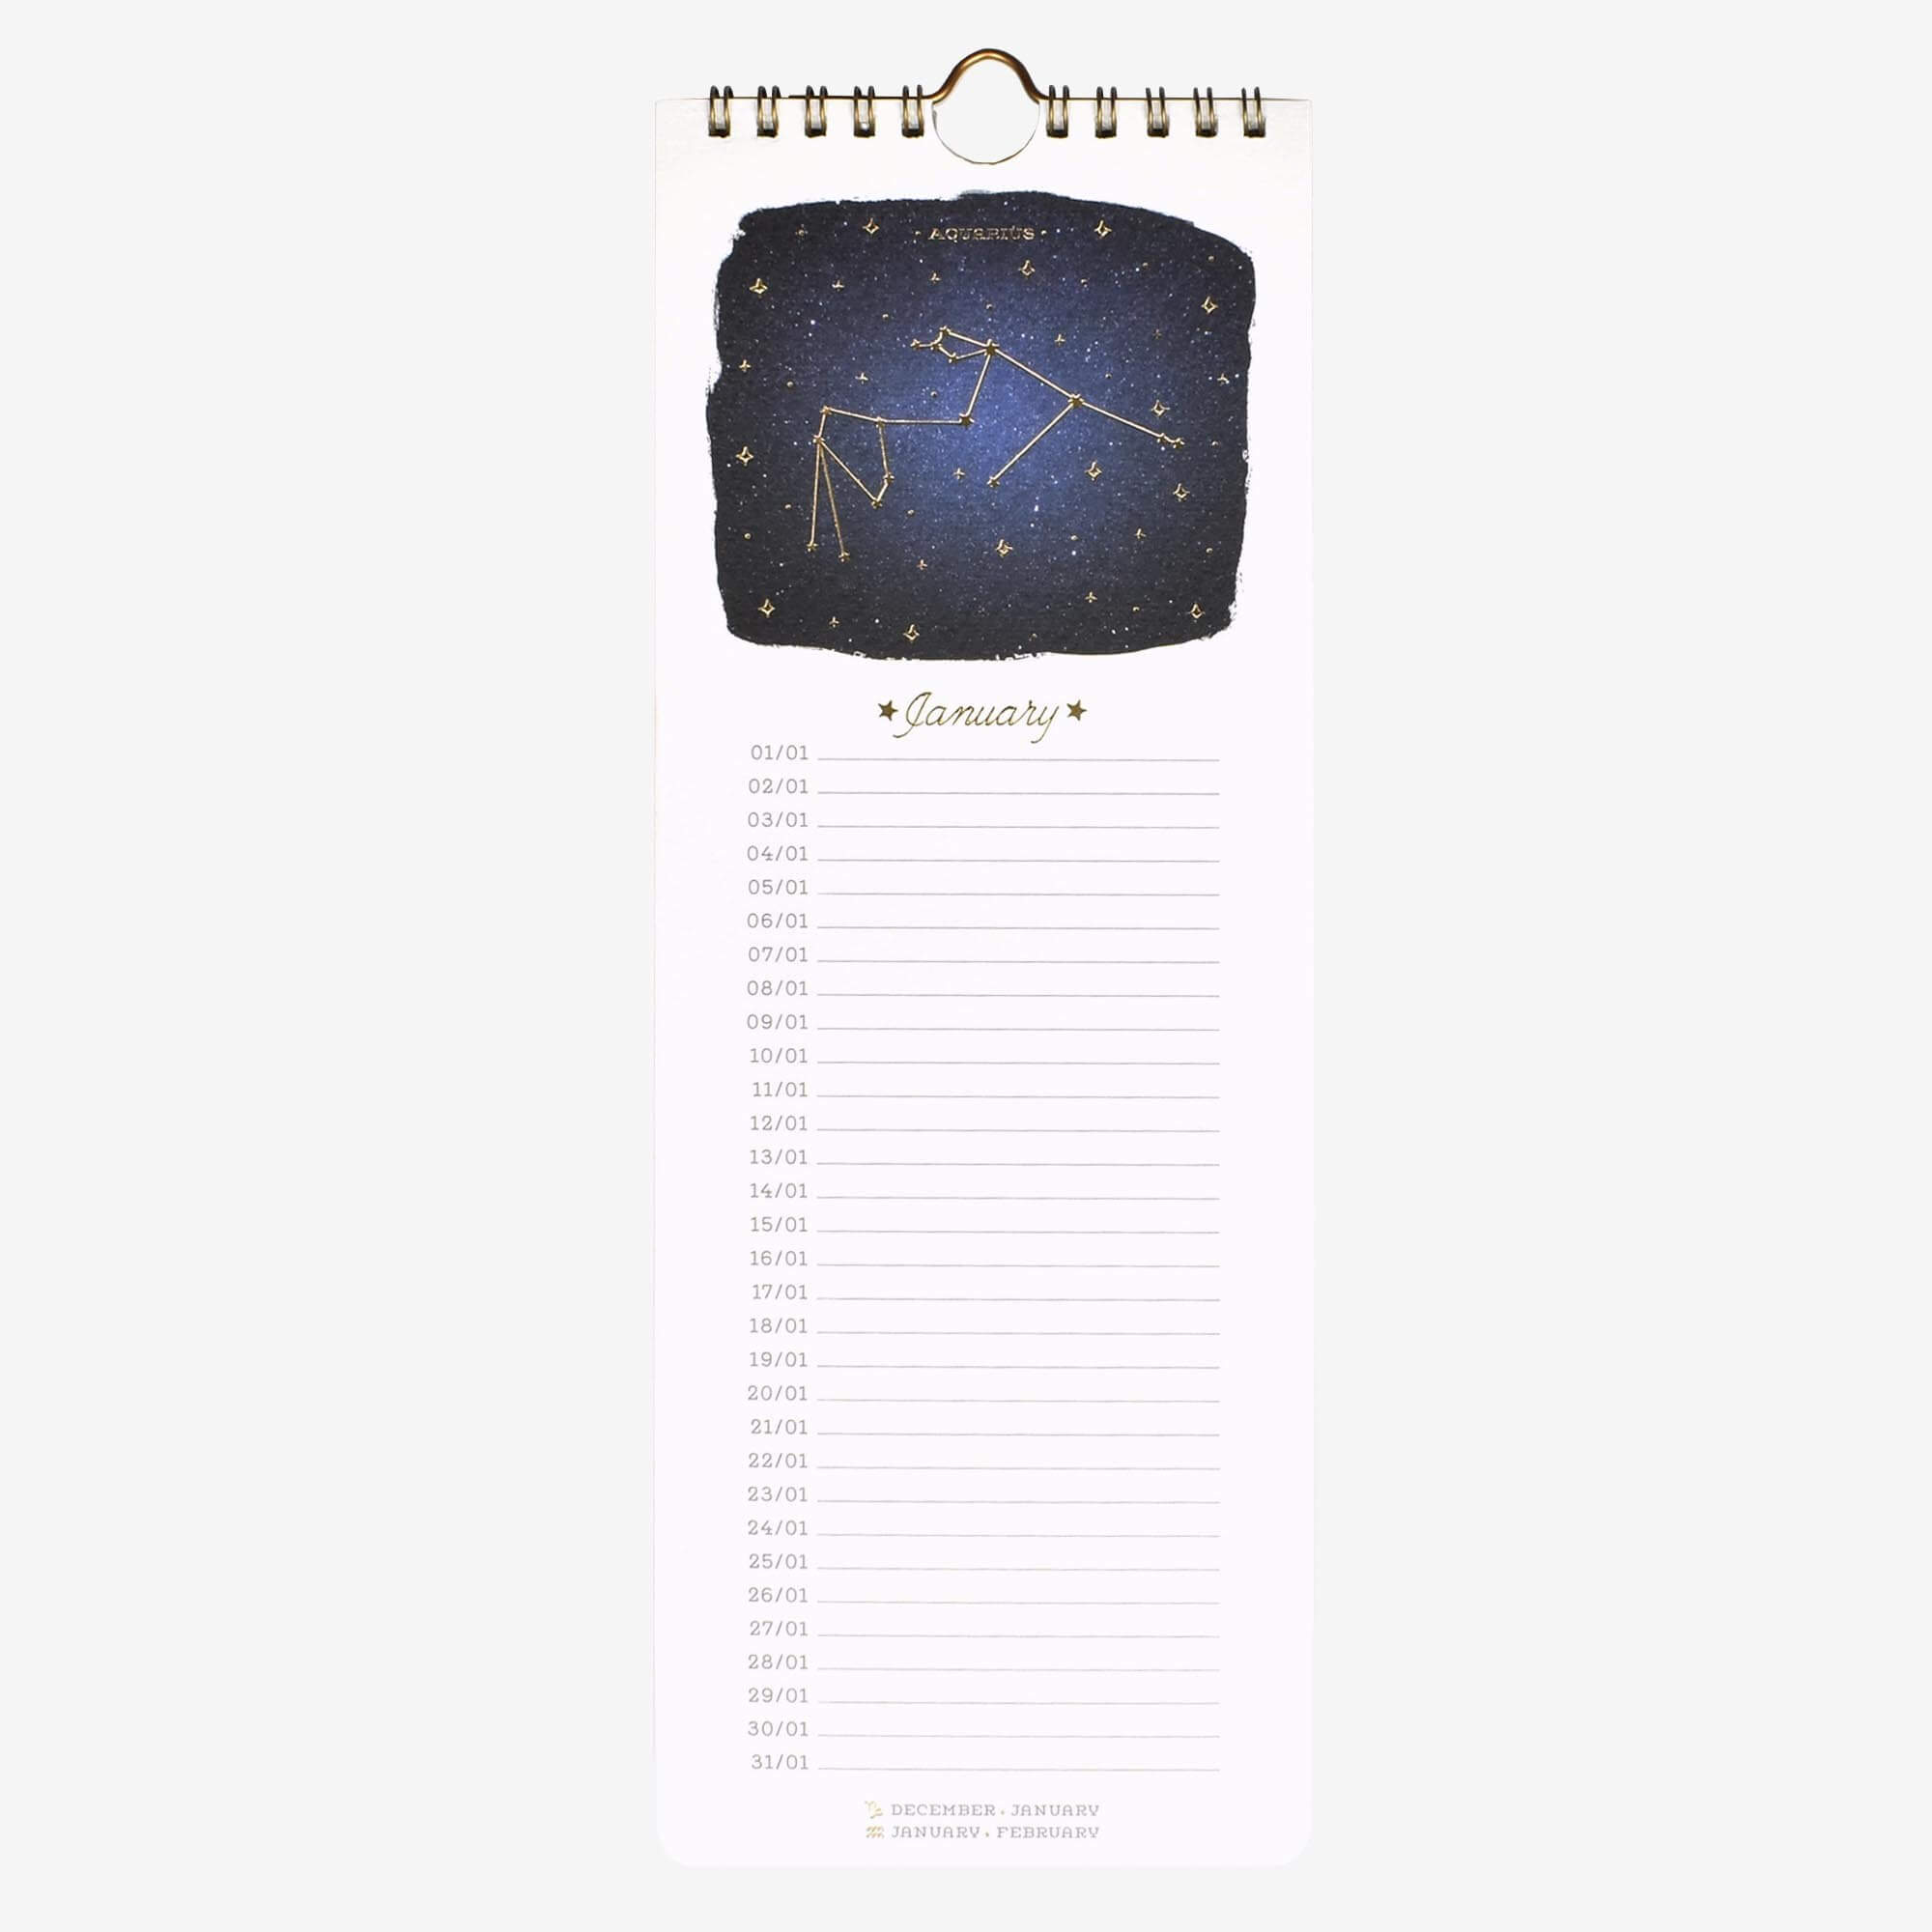 Count your lucky Stars - Calendrier anniversaire Legami 